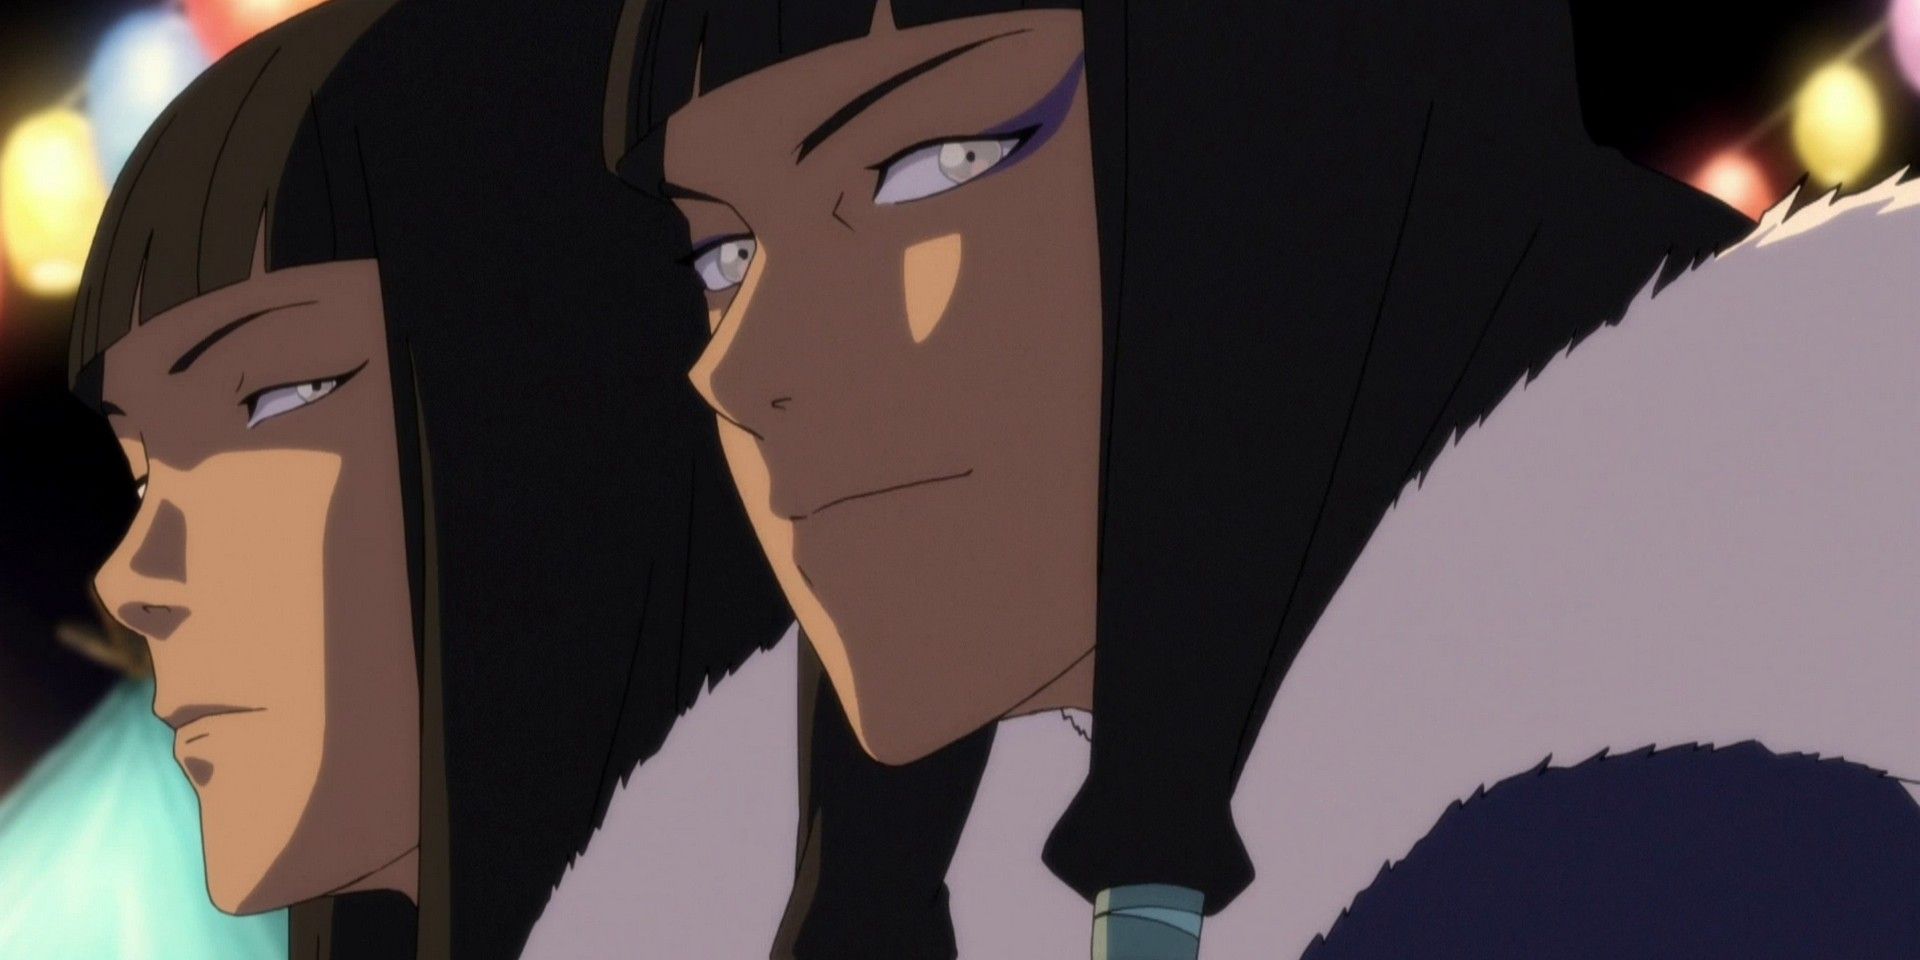 Eska and Desna of the Northern Water Tribe in Legend of Korra